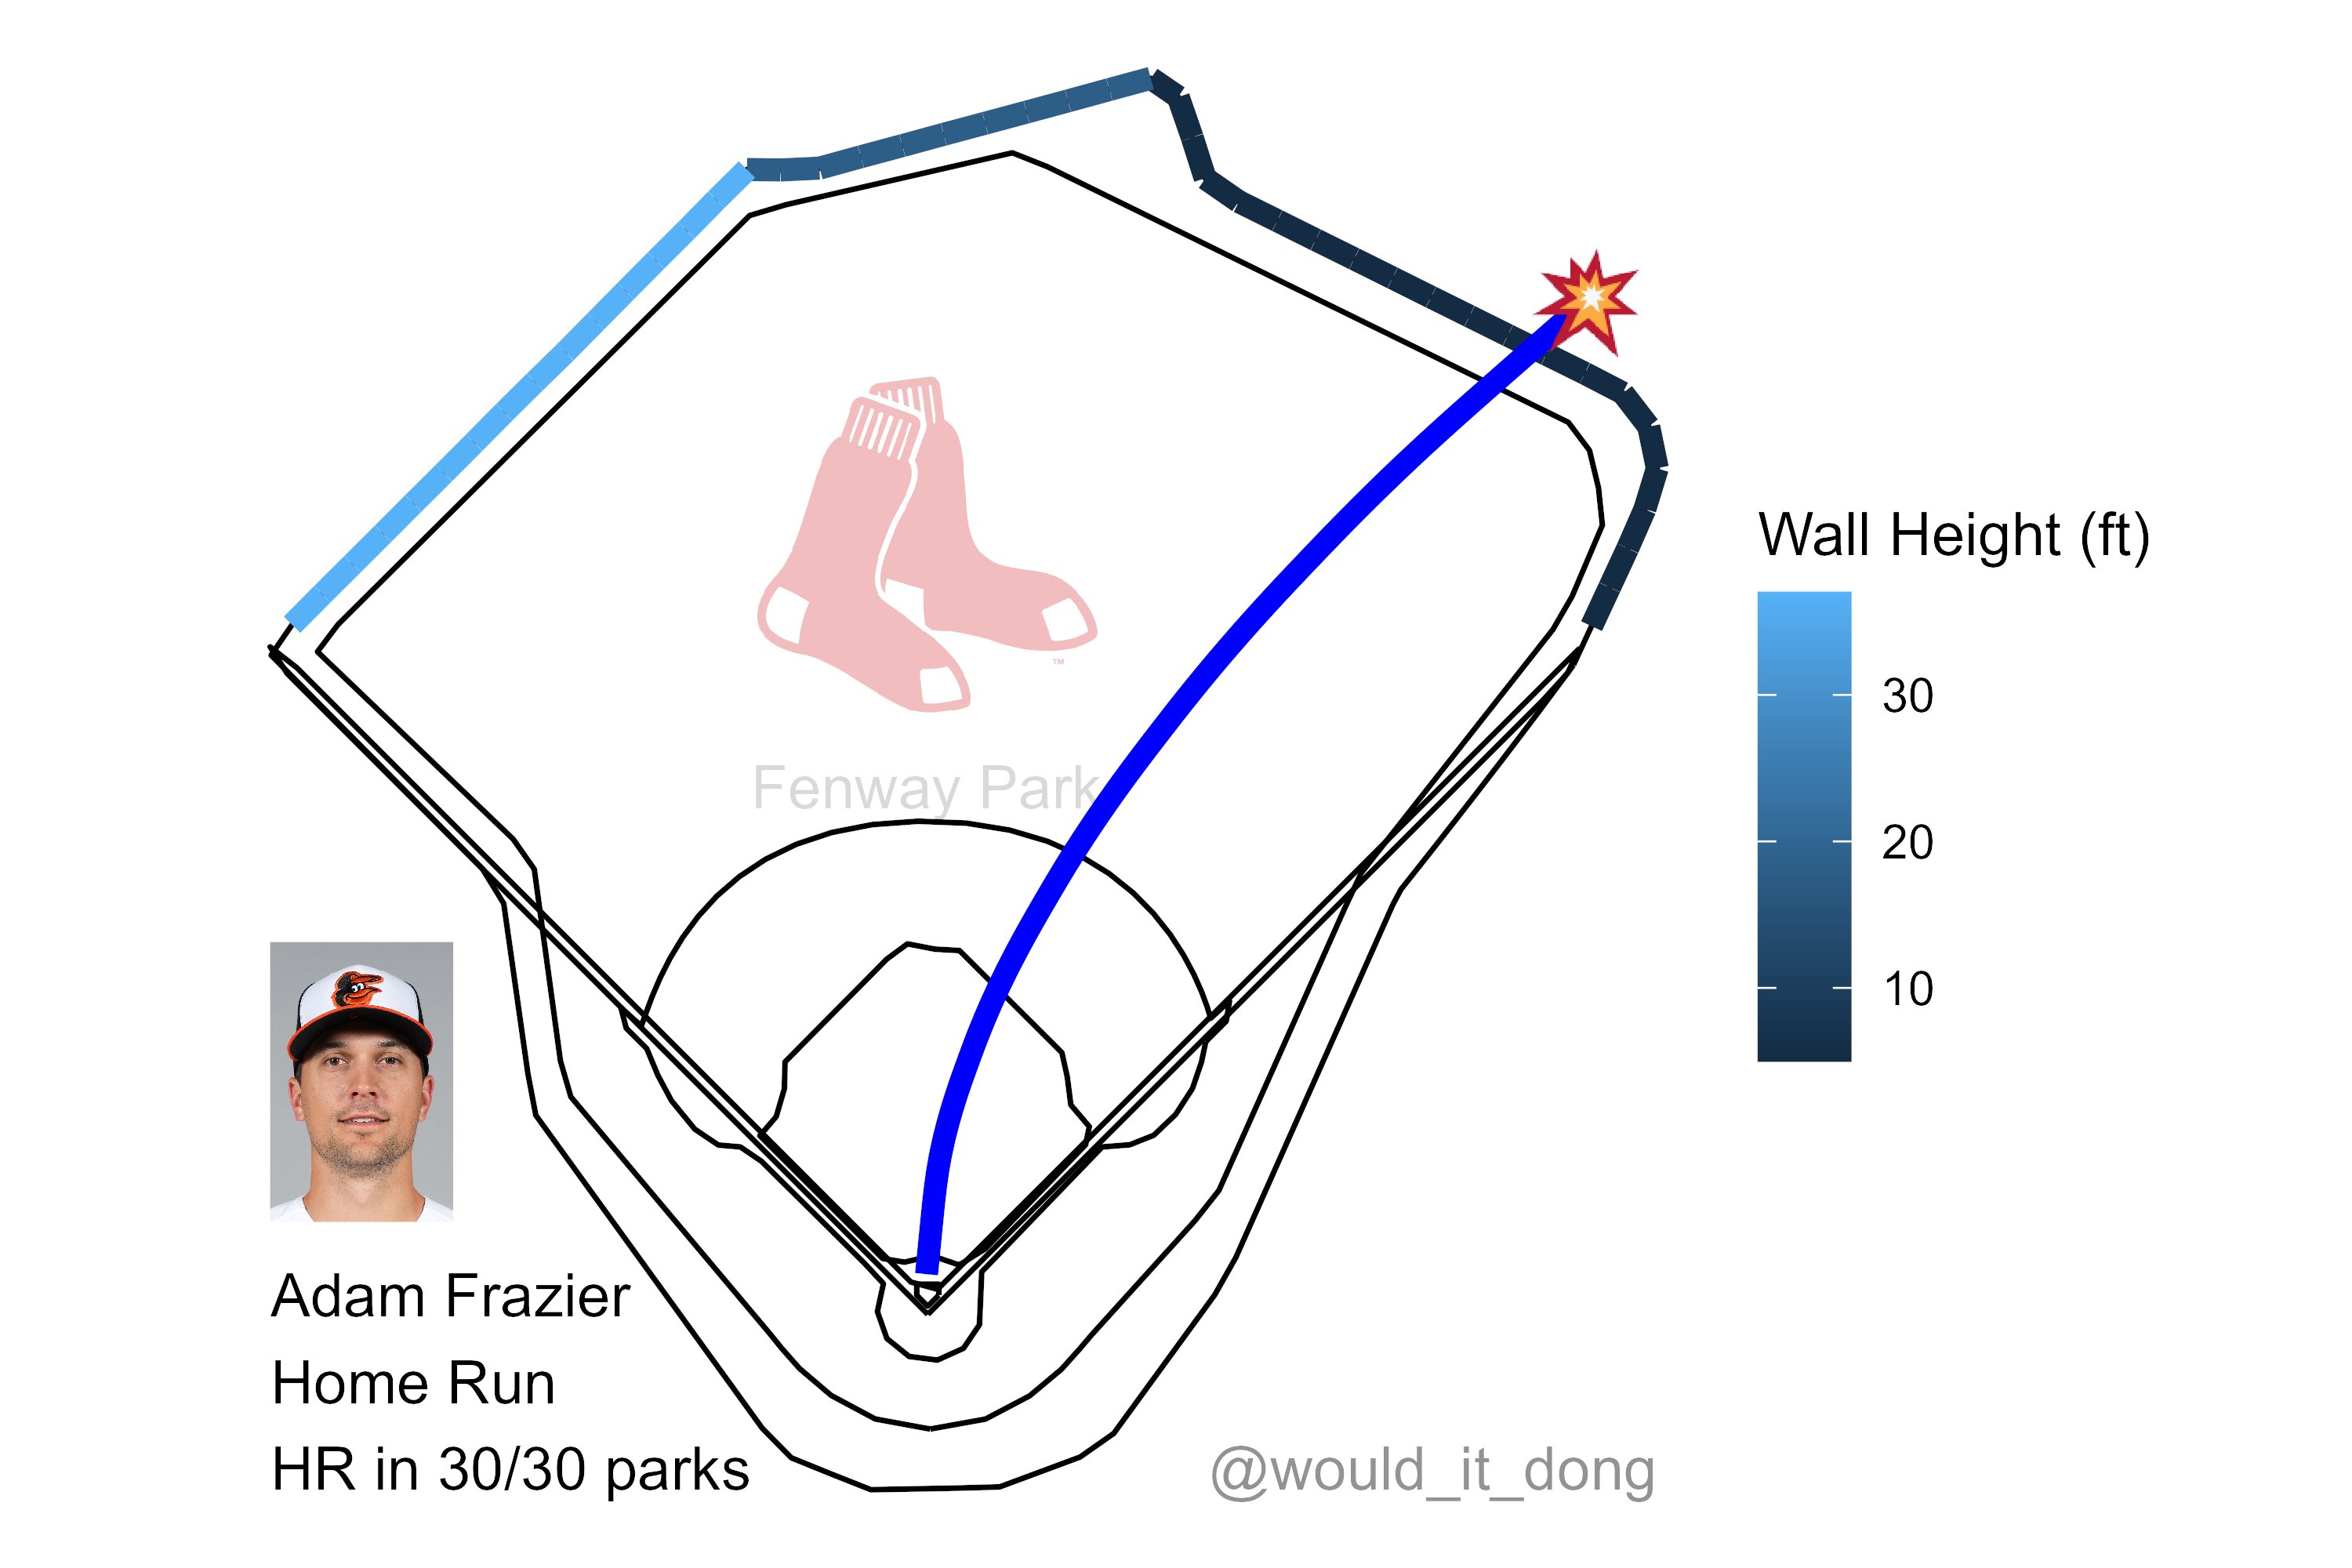 Would it dong? on X: Adam Frazier vs Tanner Houck #Birdland Home Run (1)  💣 Exit velo: 103.9 mph Launch angle: 29 deg Proj. distance: 396 ft No  doubt about that one